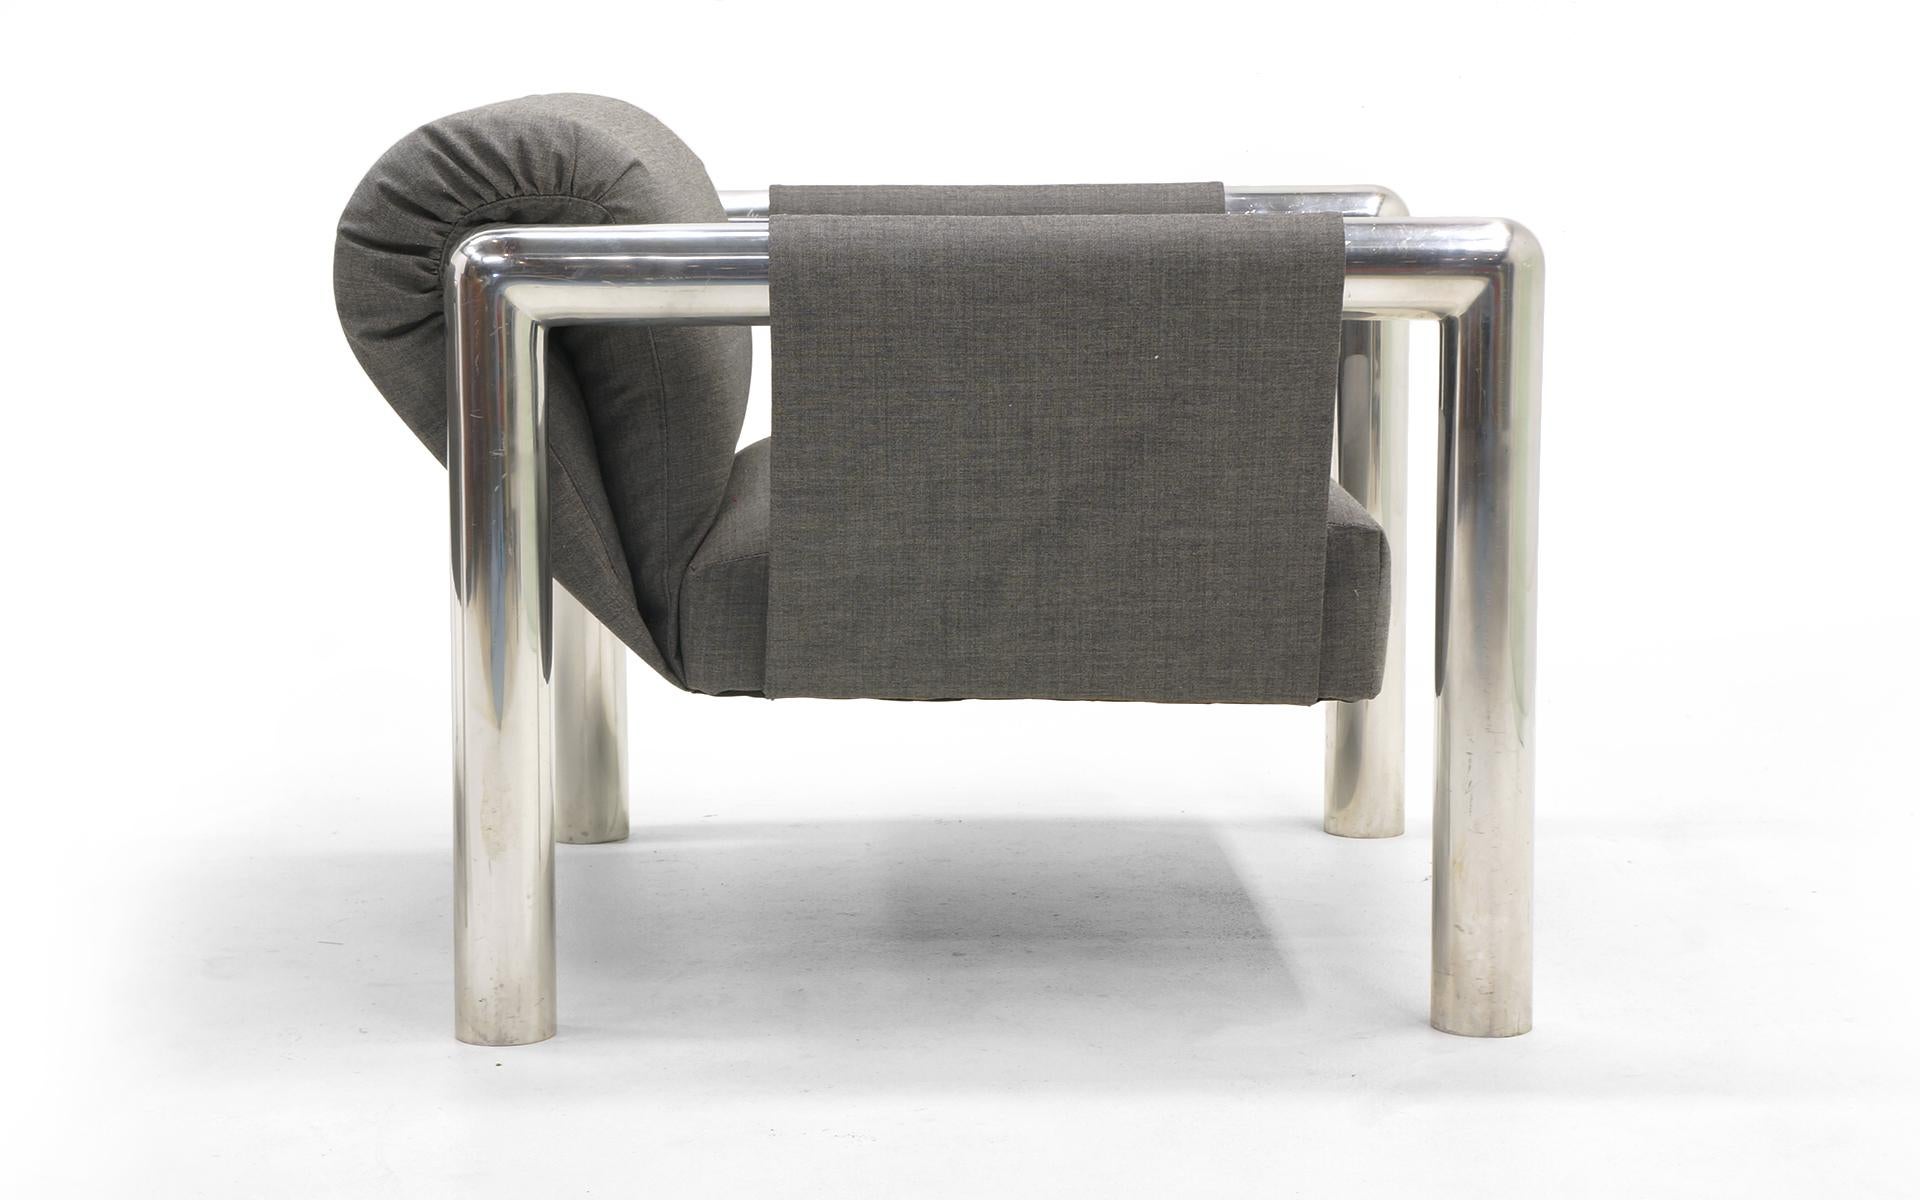 Pair of Lounge Chairs with Arms by John Mascheroni, New Maharam Upholstery 1